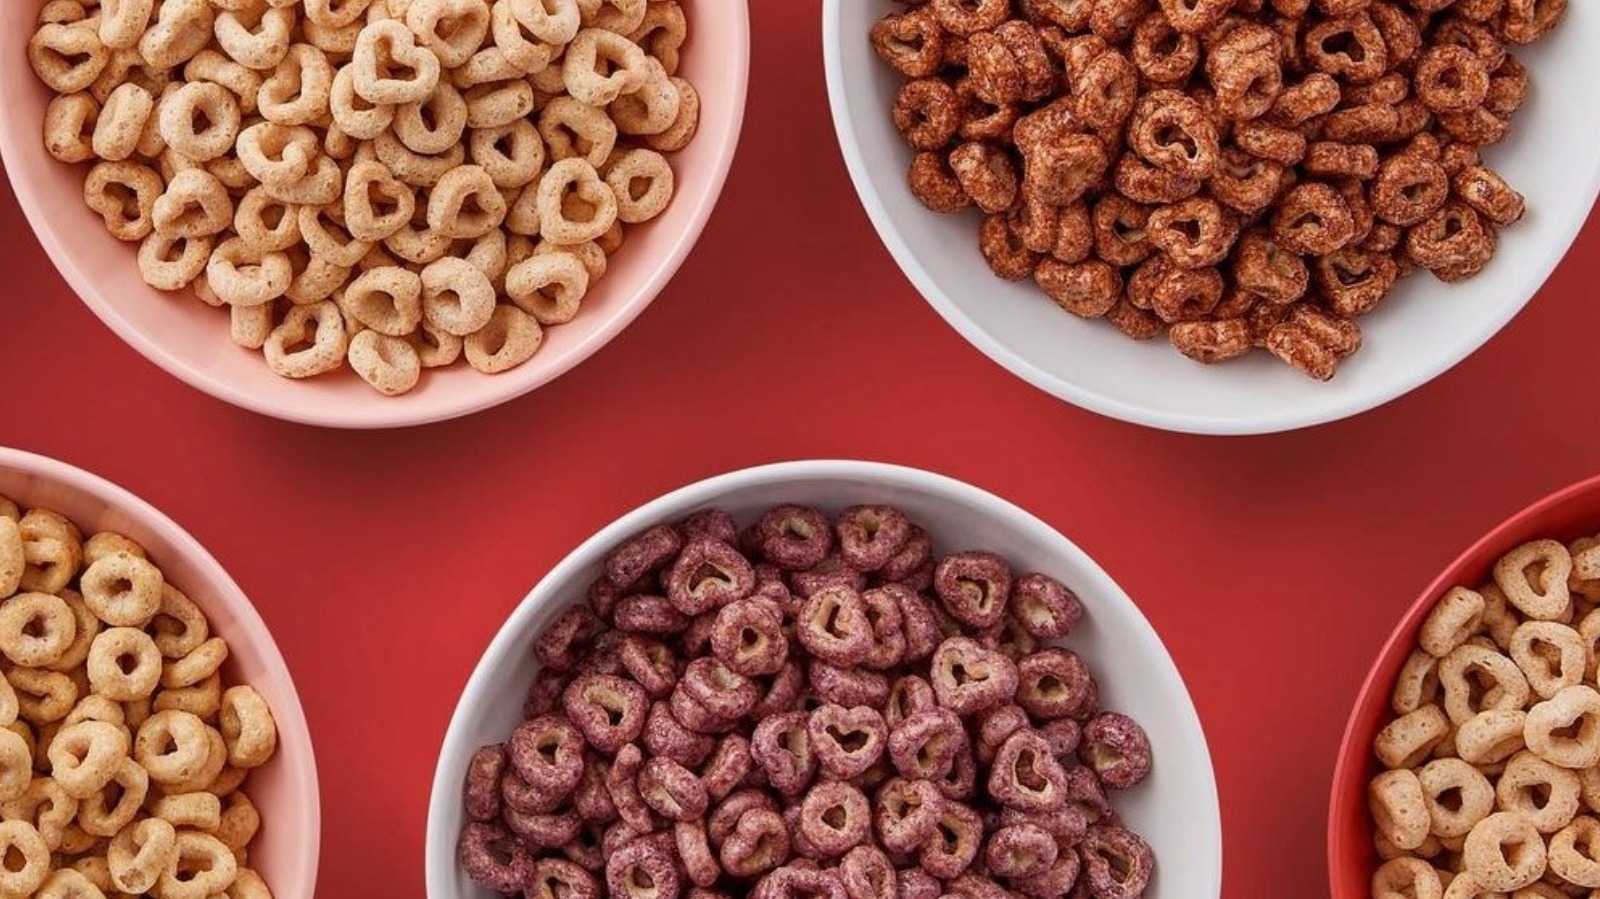 Cheerios Just Launched Two New Flavors And Fans Have Thoughts